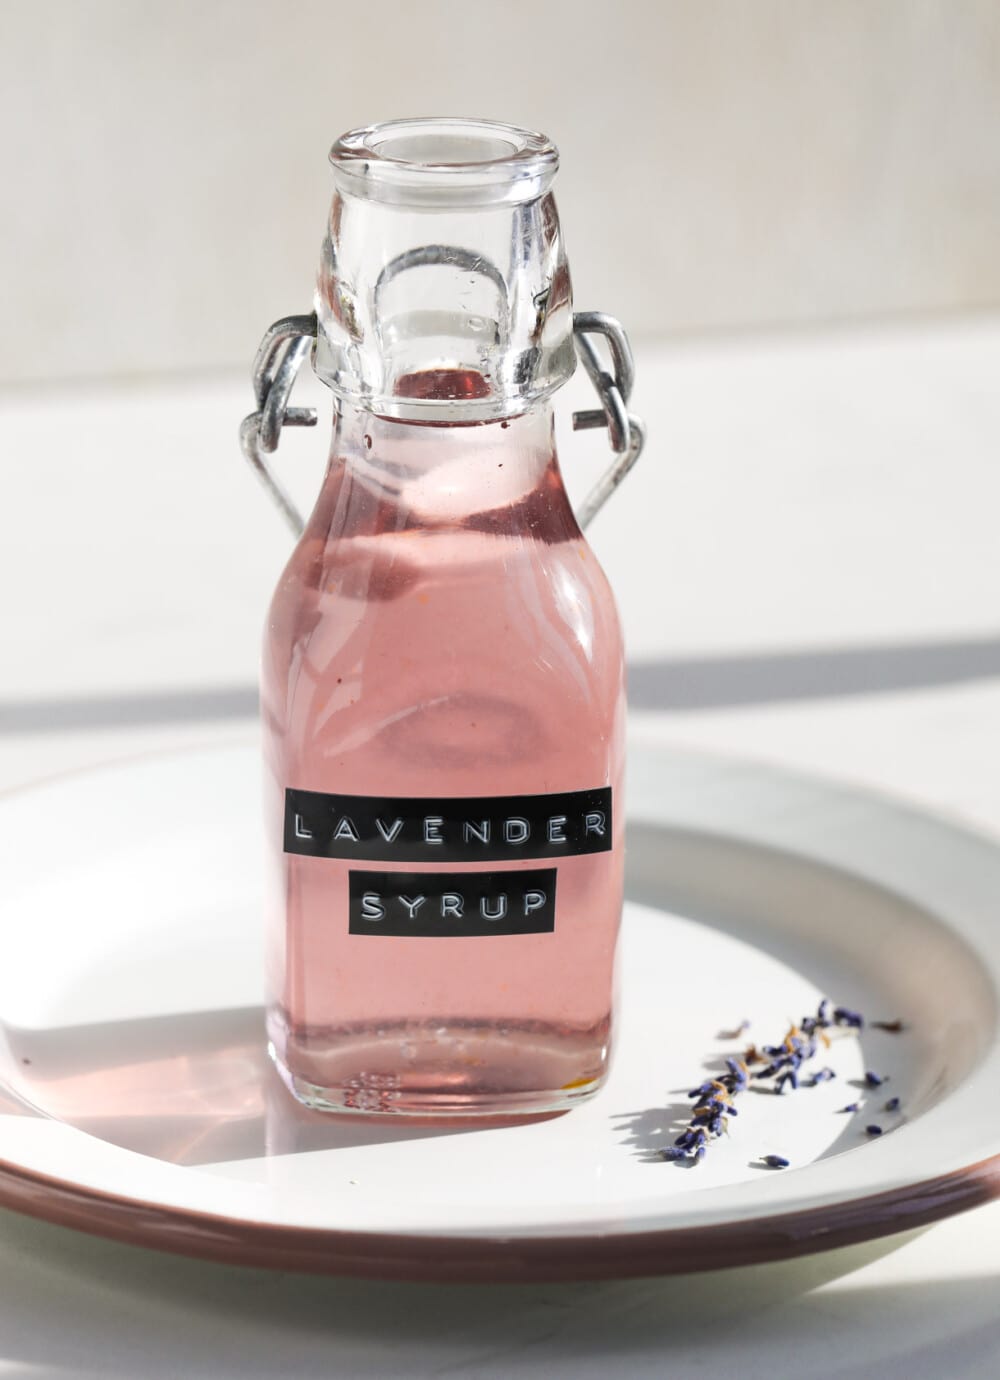 lavender syrup in a glass bottle on a white plate